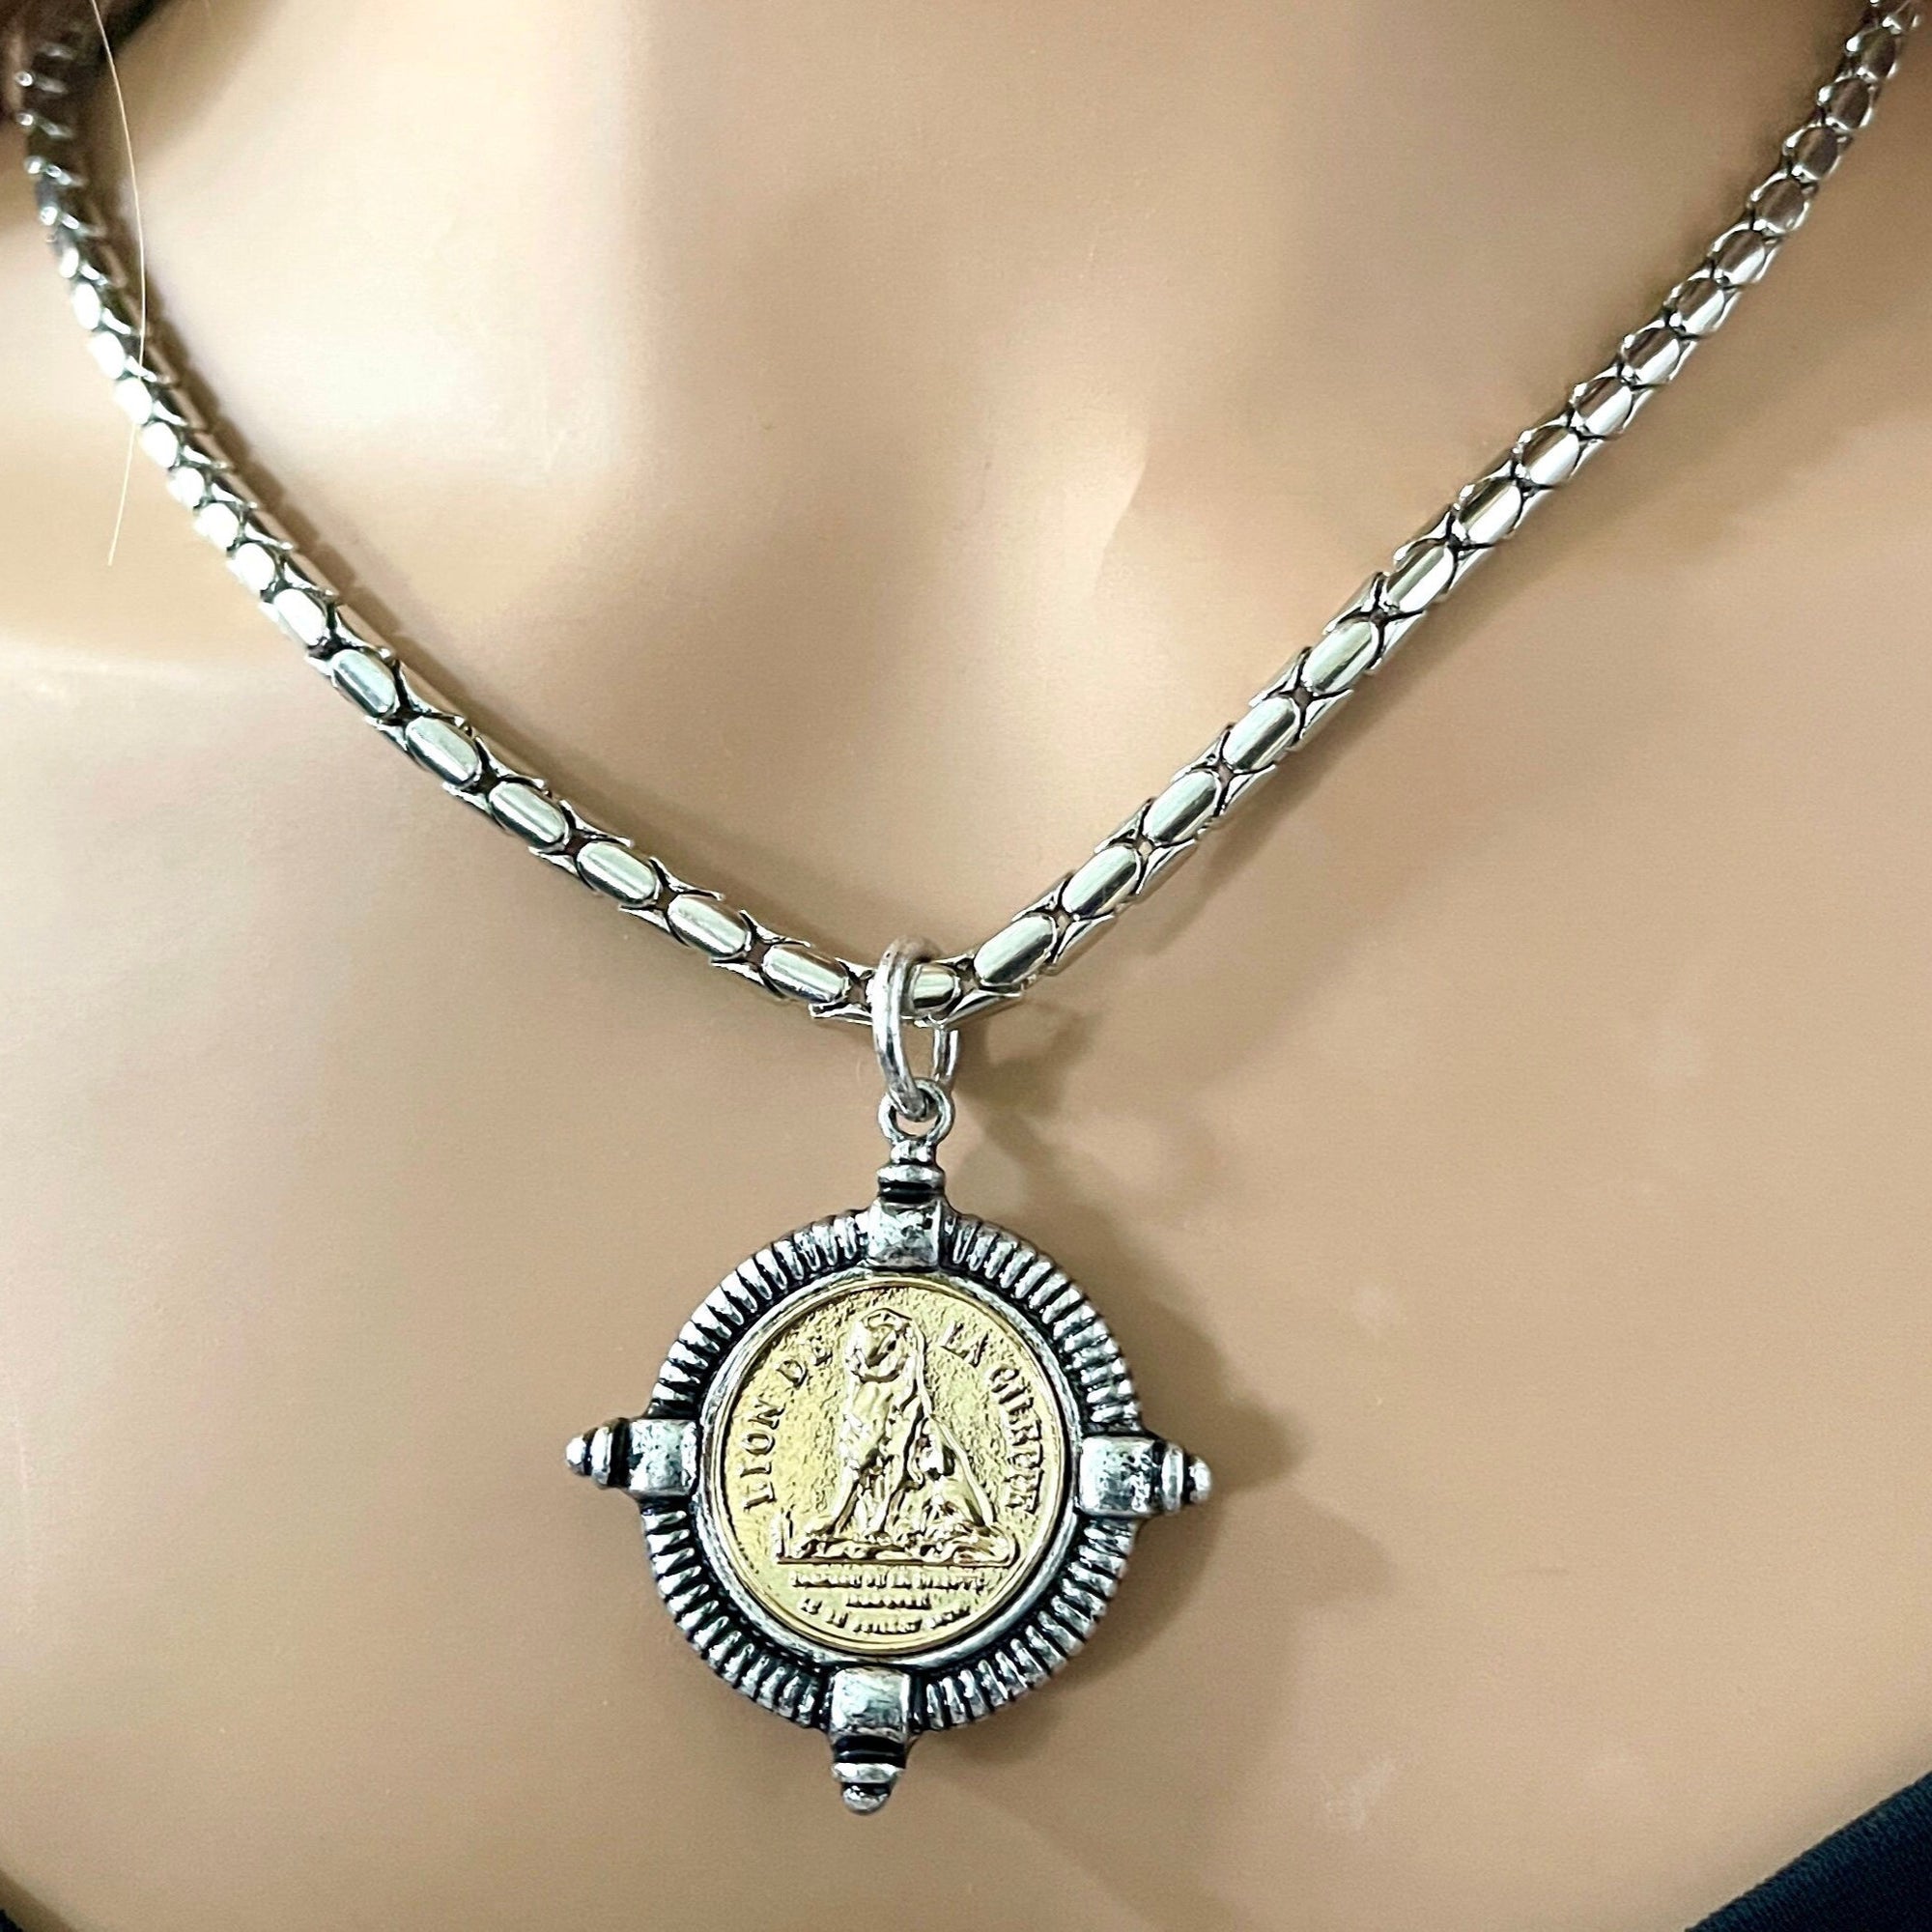 Thick Silver Snake Chain Necklace-Lion De La Gileppe Coin-Reproduction French Medal-Lion Jewelry-Lion Pendant-Mixed Metal-Lobster Clasp